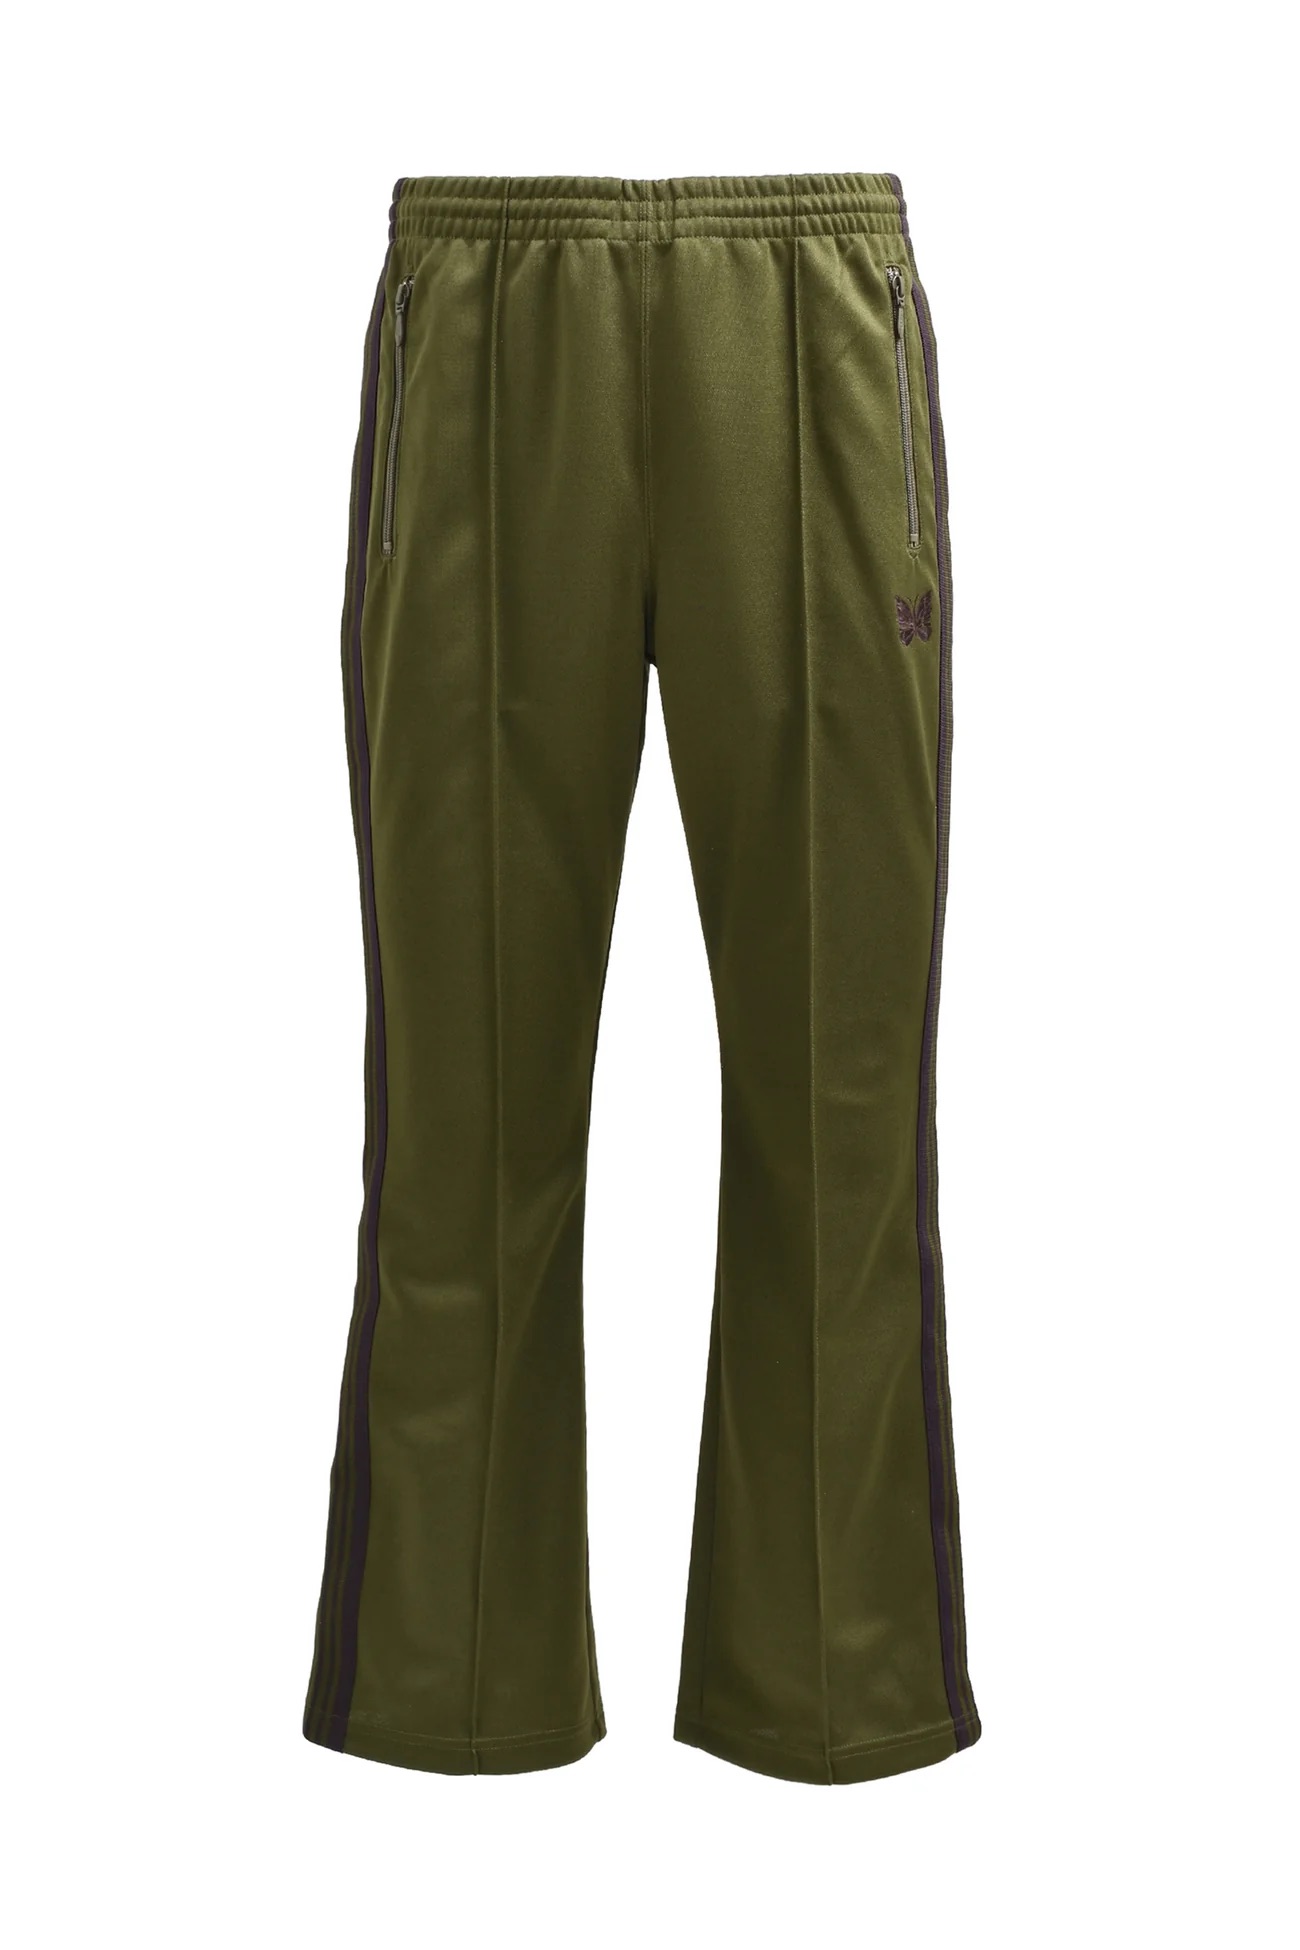 NEEDLES(ニードルス) / BOOT-CUT TRACK PANT - POLY SMOOTH / S(S GREEN)｜  ザ・ギャラリー・ボックス｜静岡PARCO | ONLINE PARCO（オンラインパルコ）